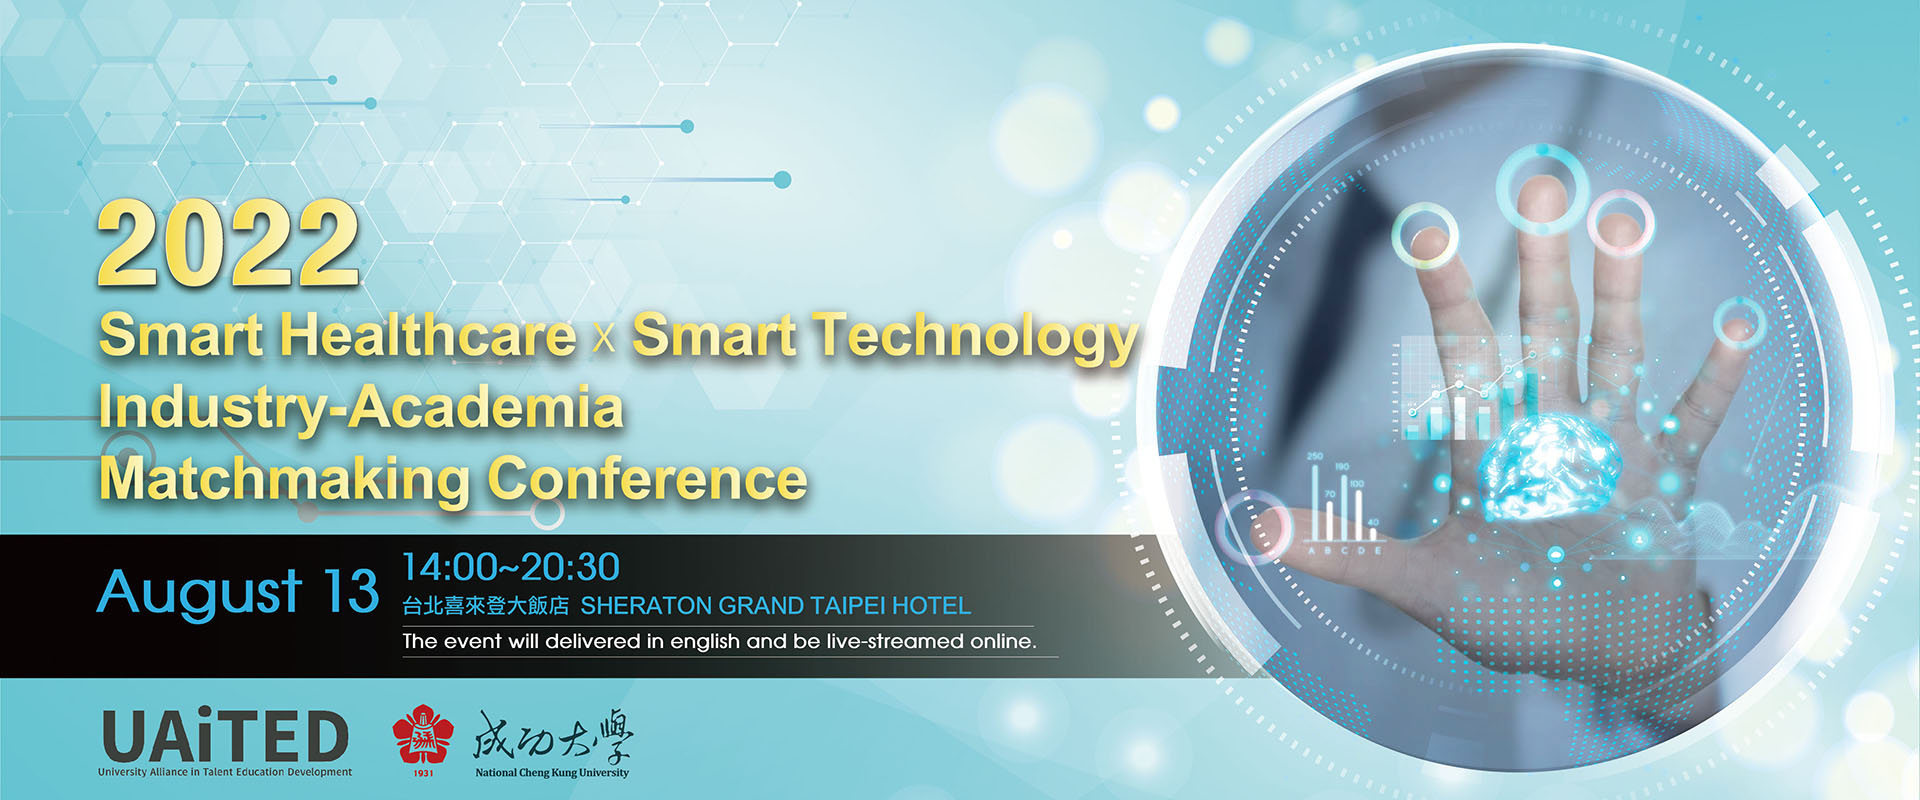 111/08/13  2022 Smart Healthcare X Smart Technology Industry-Academia Matchmaking Conference